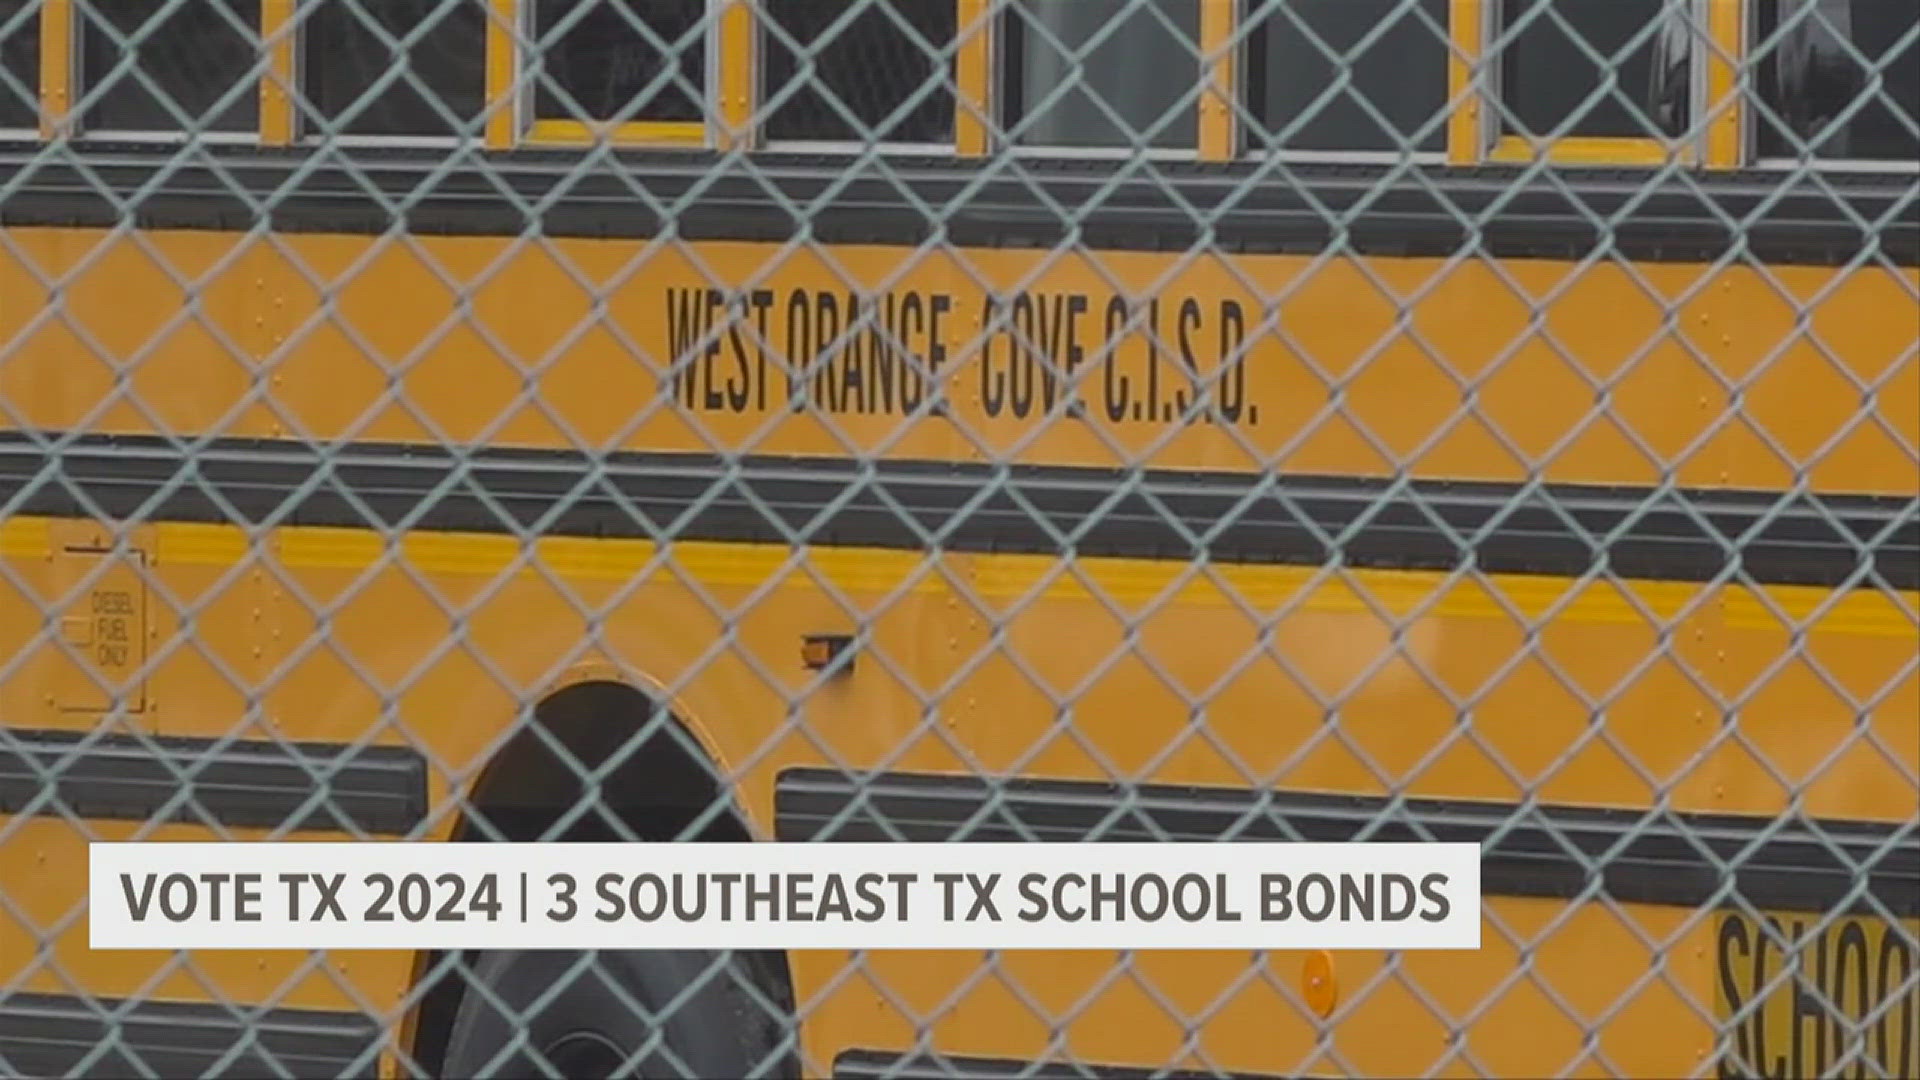 Voters approved a $72 million bond in the West Orange-Cove CISD and a $24 million bond in the Evadale ISD but said no to a $47.6 million bond in Deweyville.